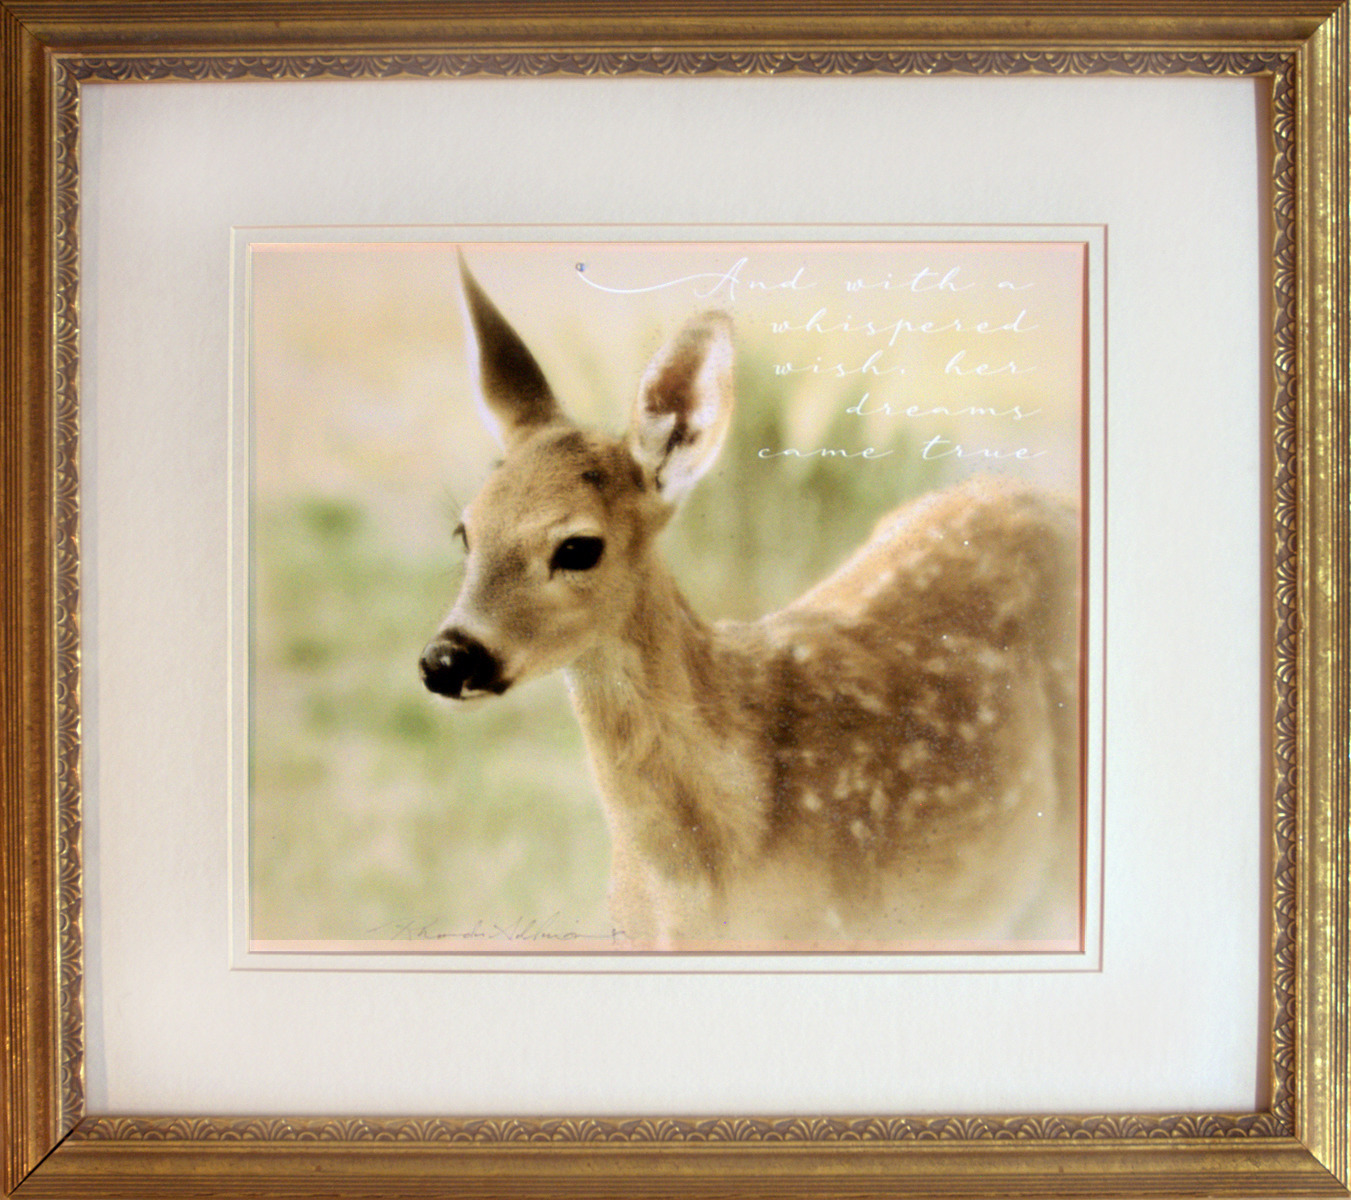 Fawn framed gold matted dh2jxl